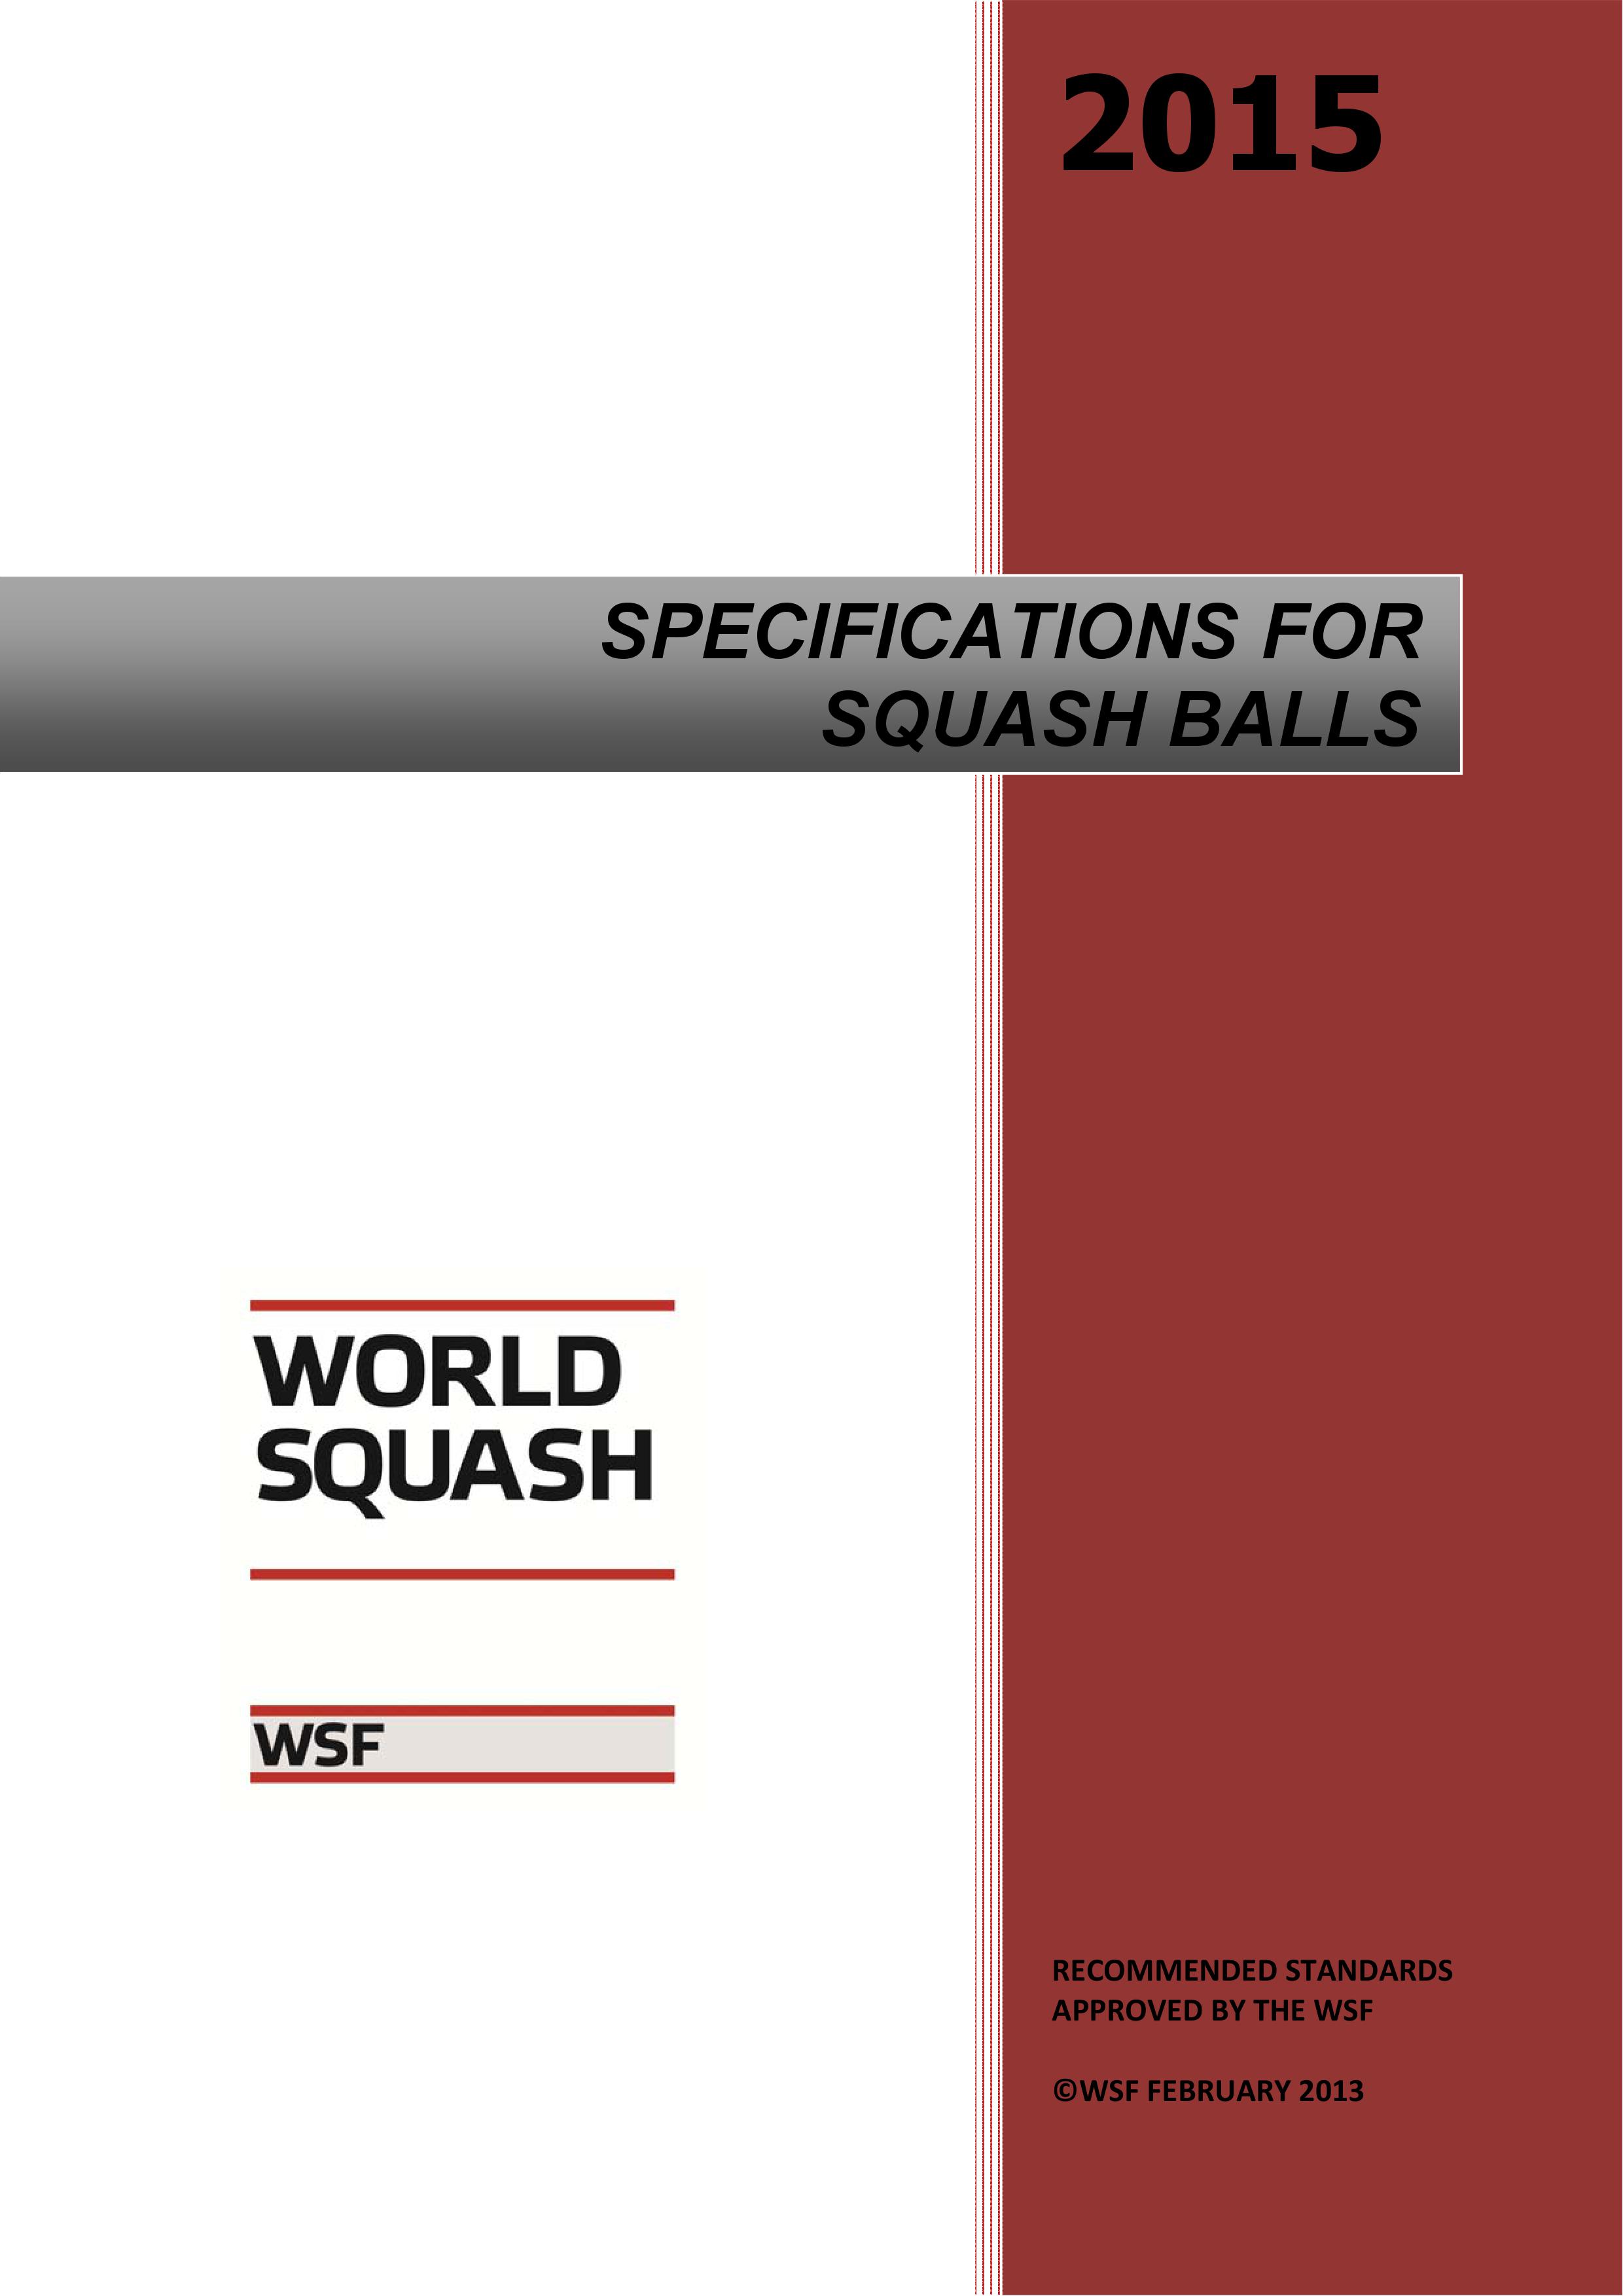 World Squash Federation Ball Specification Rules - Global Squash Coach - Page 1.jpg